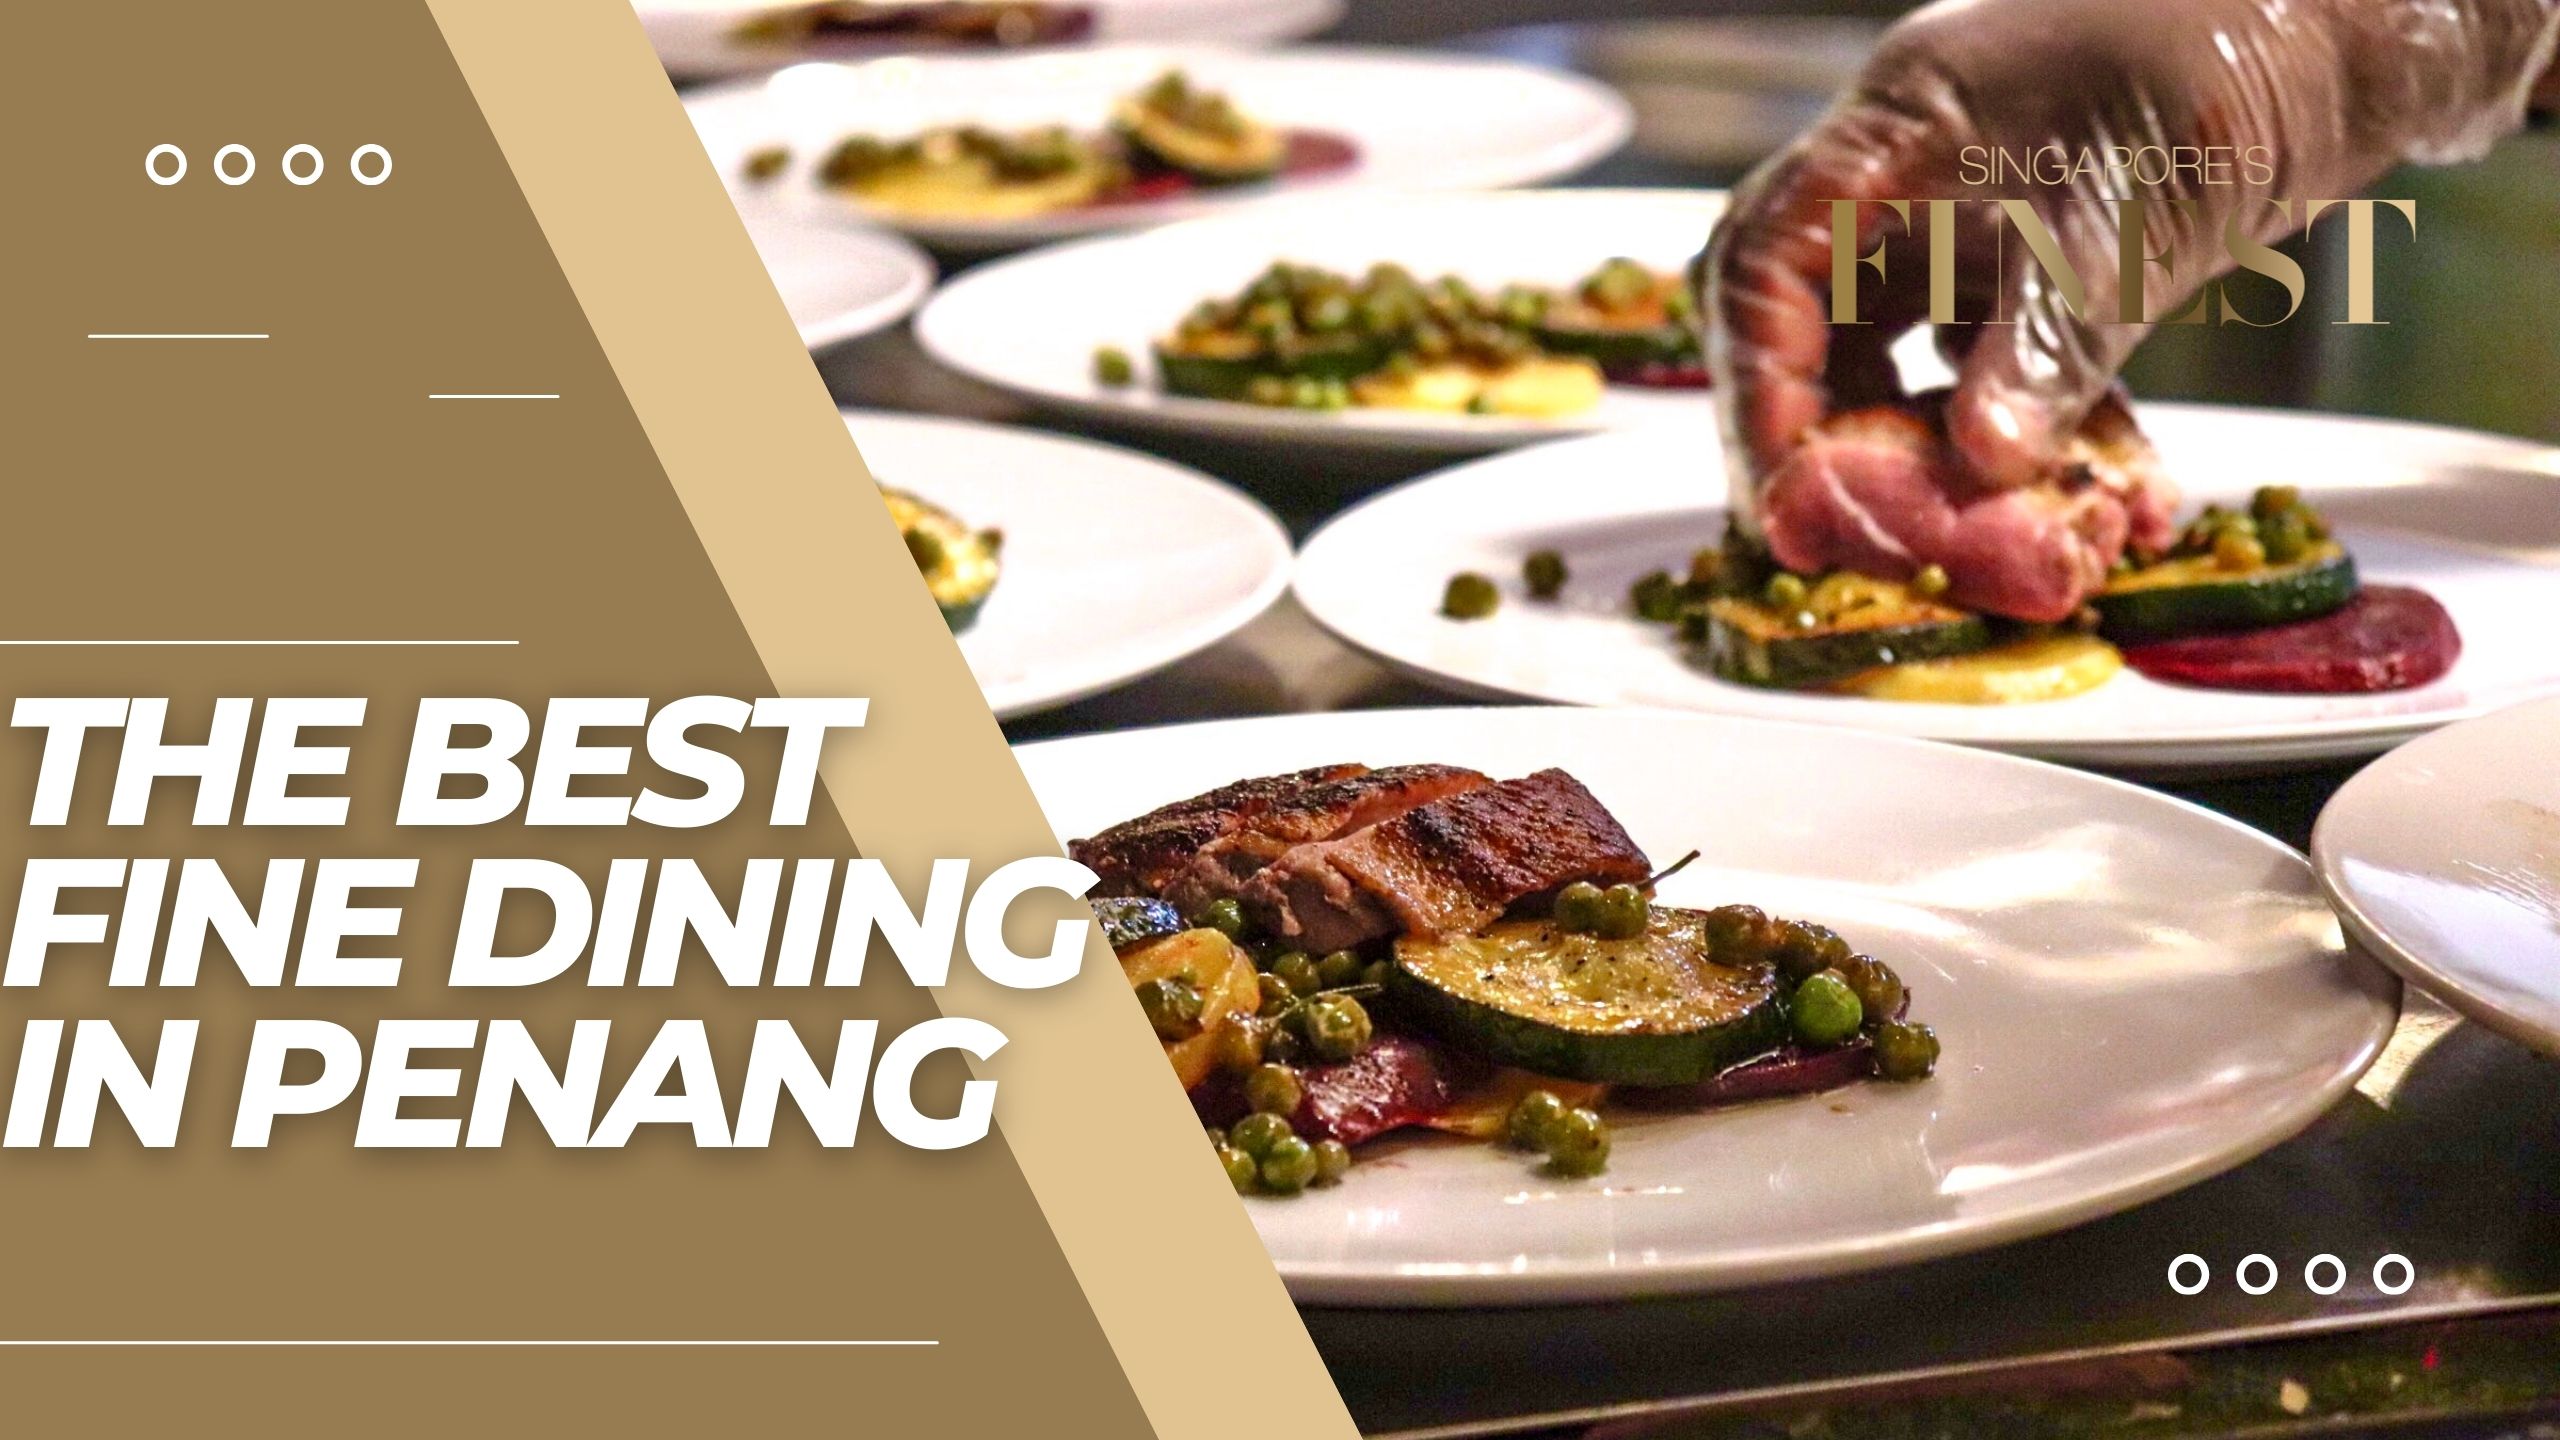 The Finest Fine Dining in Penang